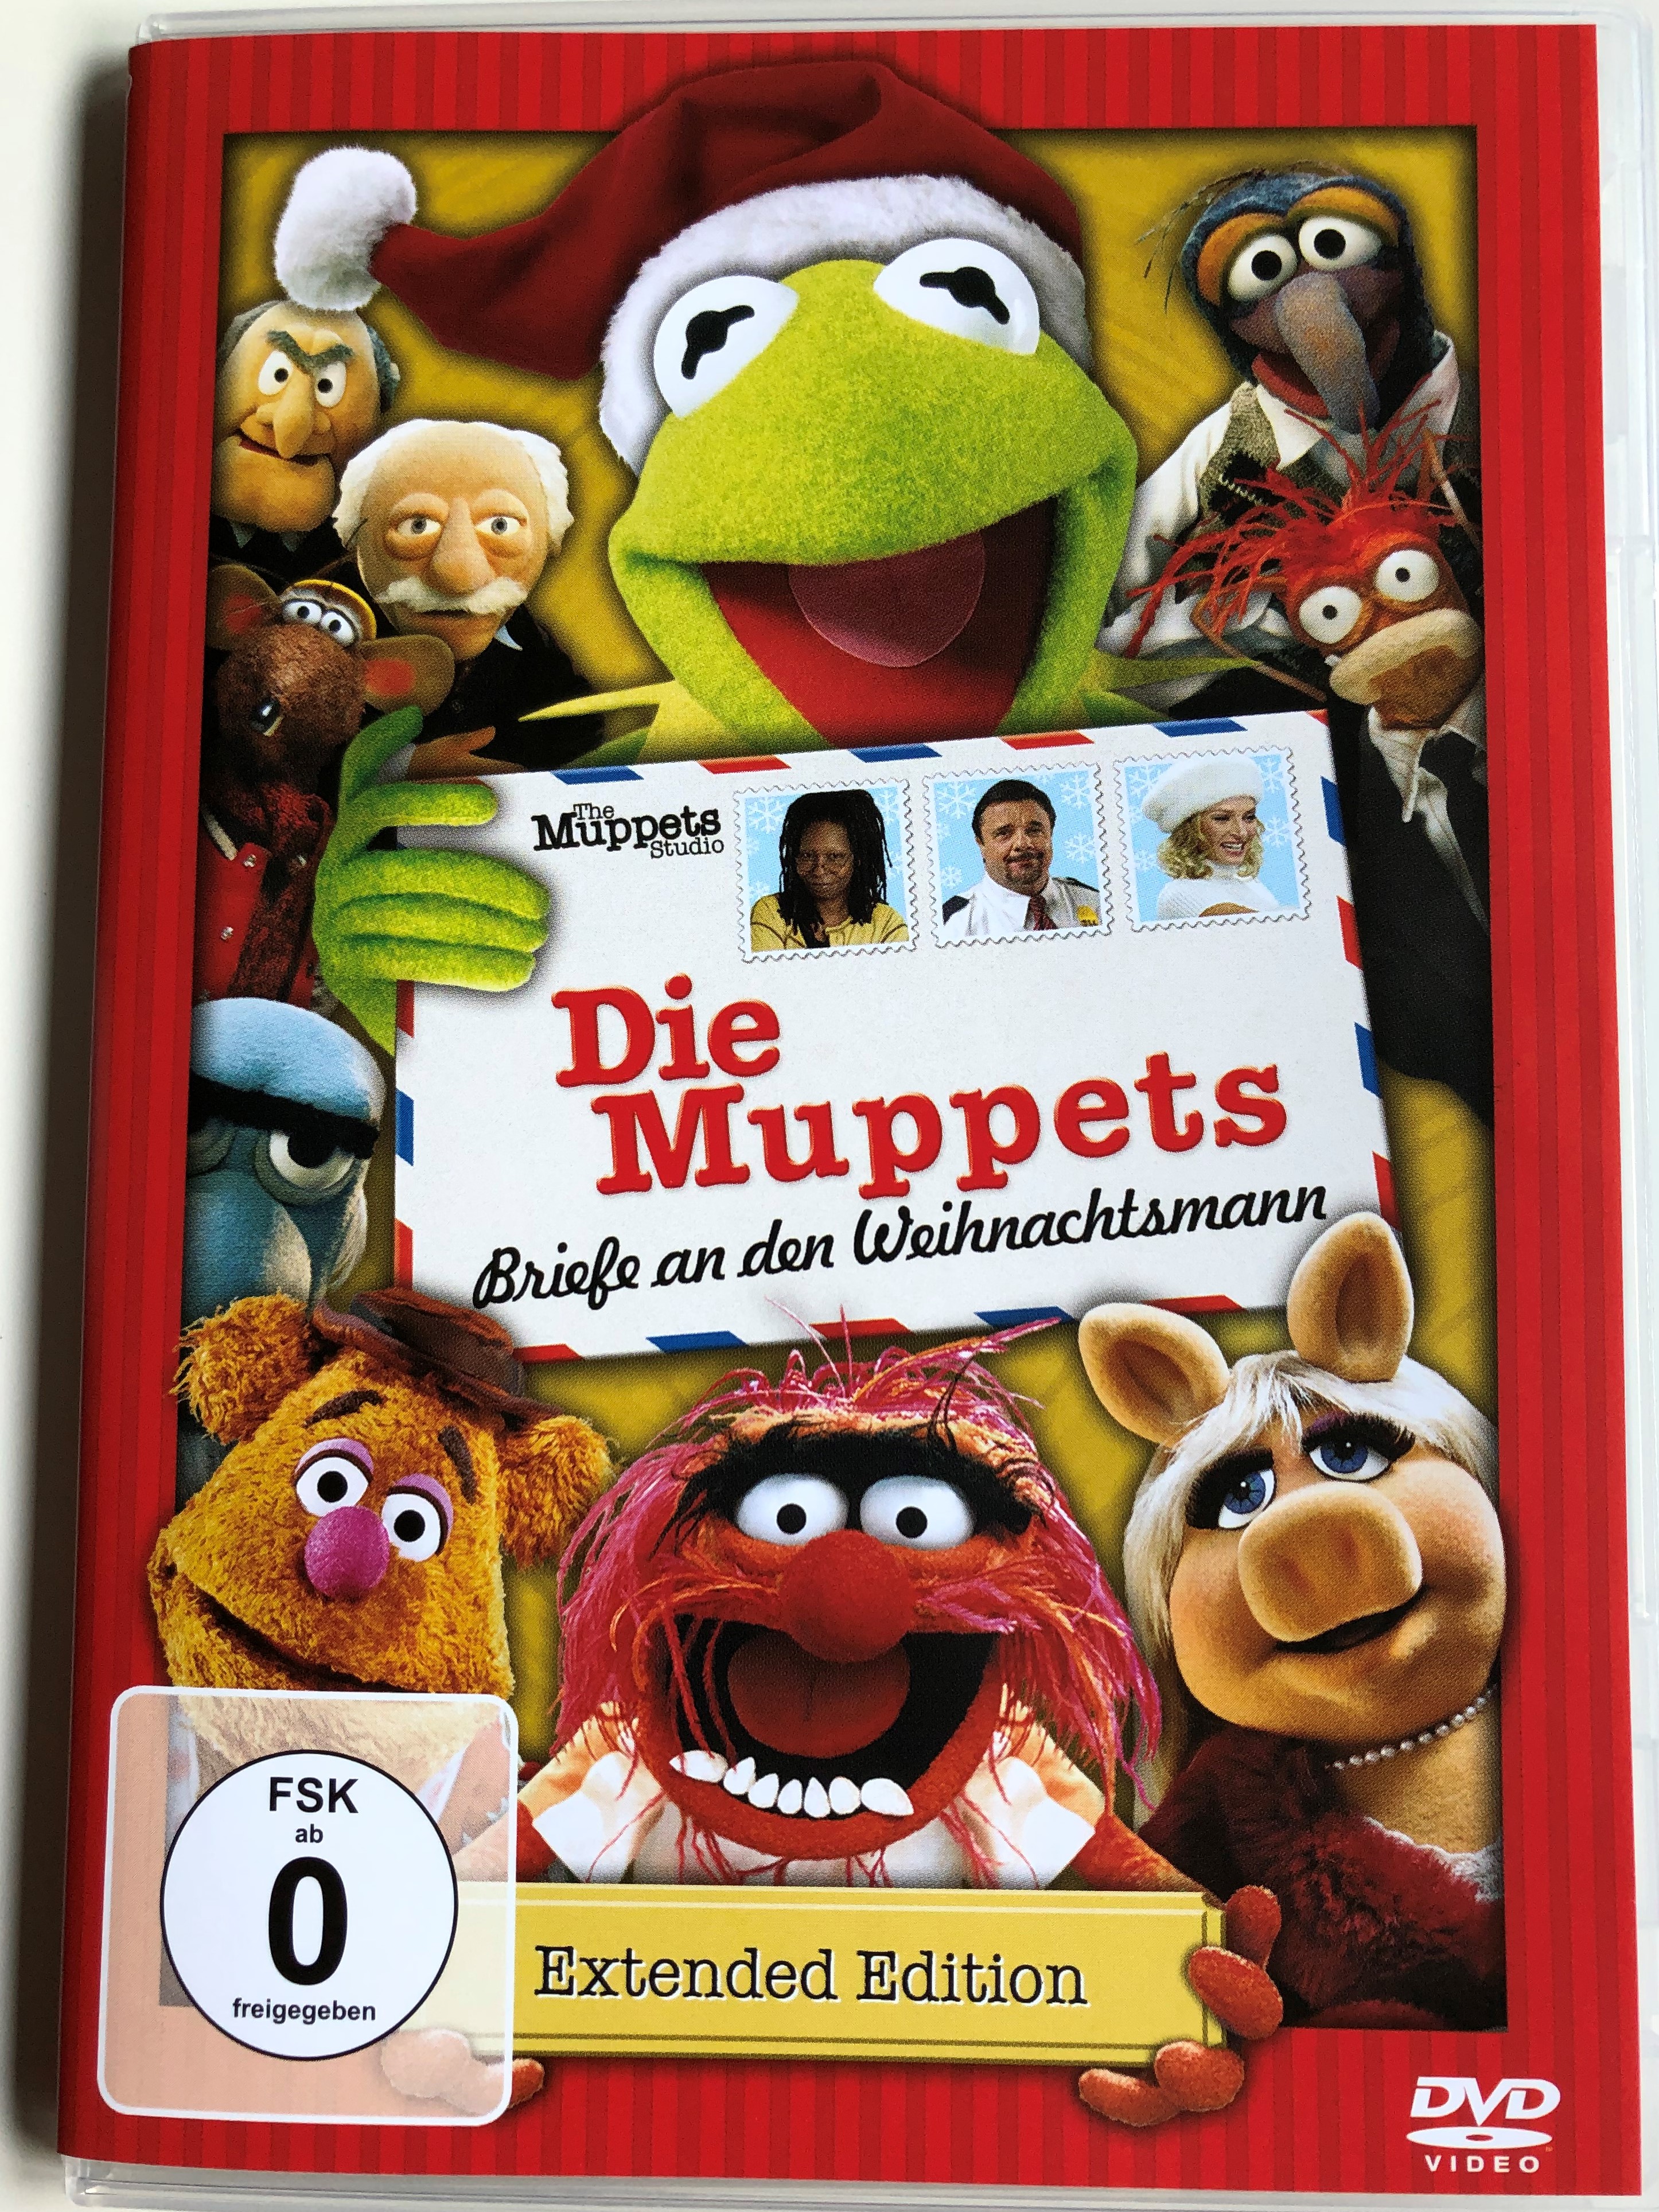 a-muppets-christmas-letters-to-santa-dvd-2008-die-muppets-briefe-an-den-weihnachtsmann-1.jpg